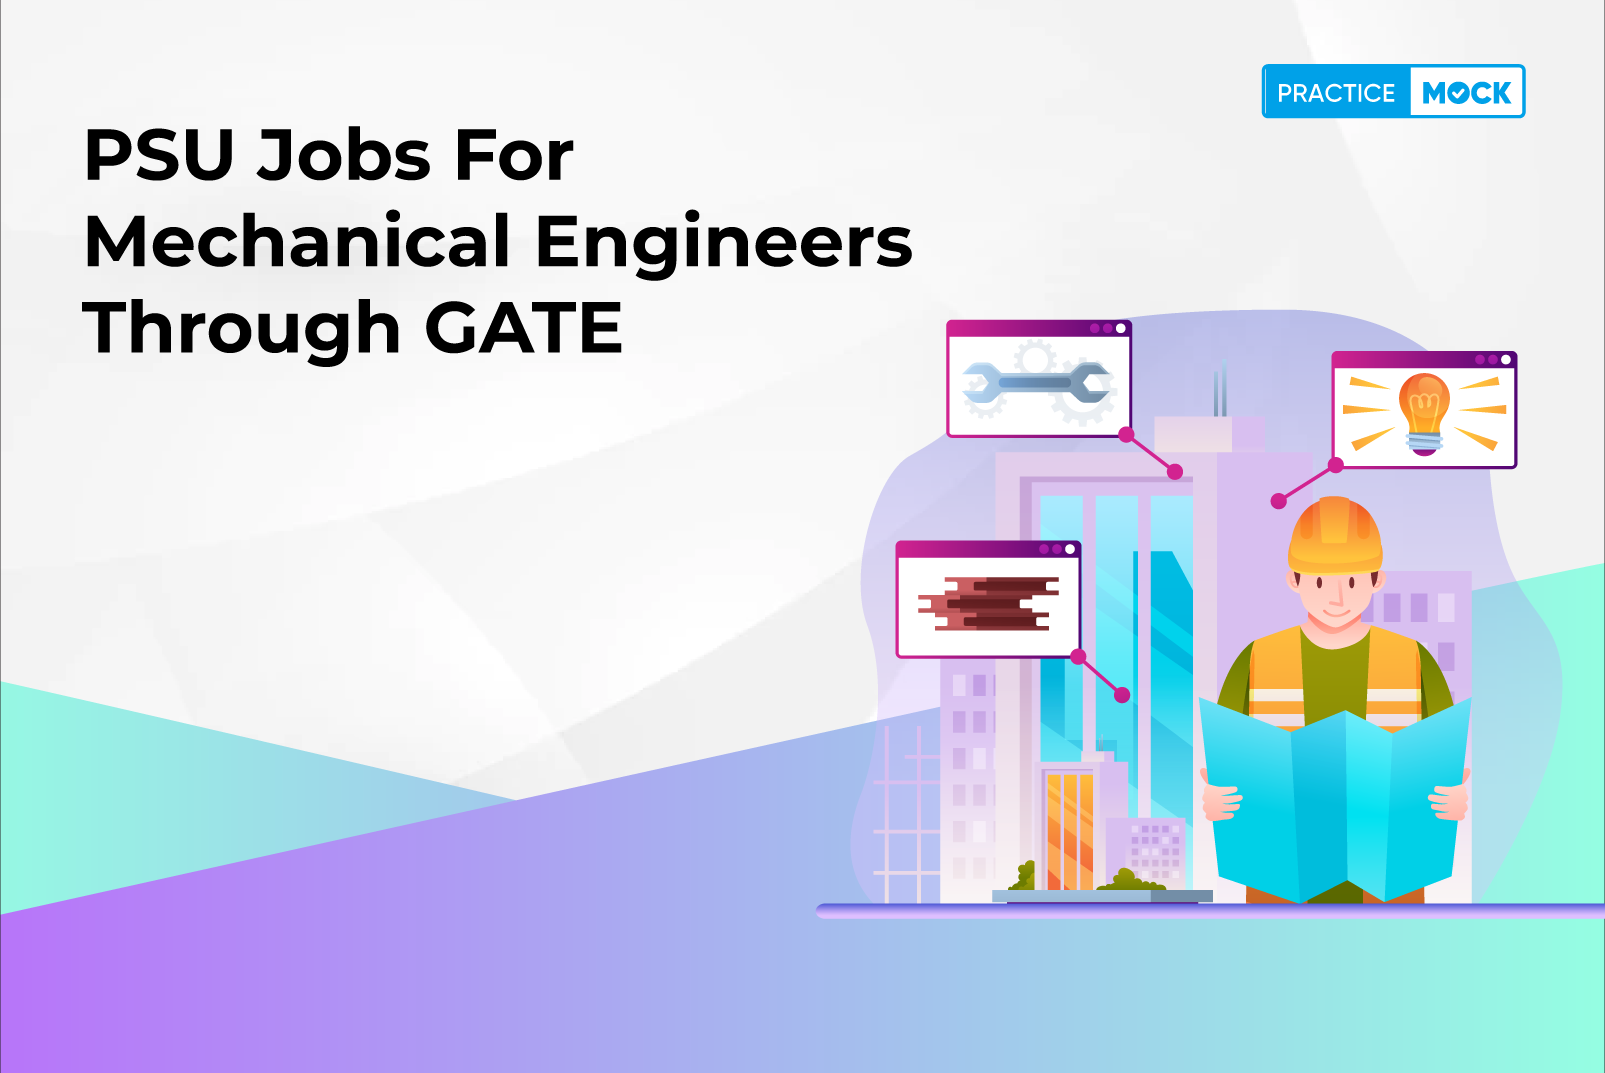 PSUs-Jobs-for-Mechanical-Engineers-through-GATE